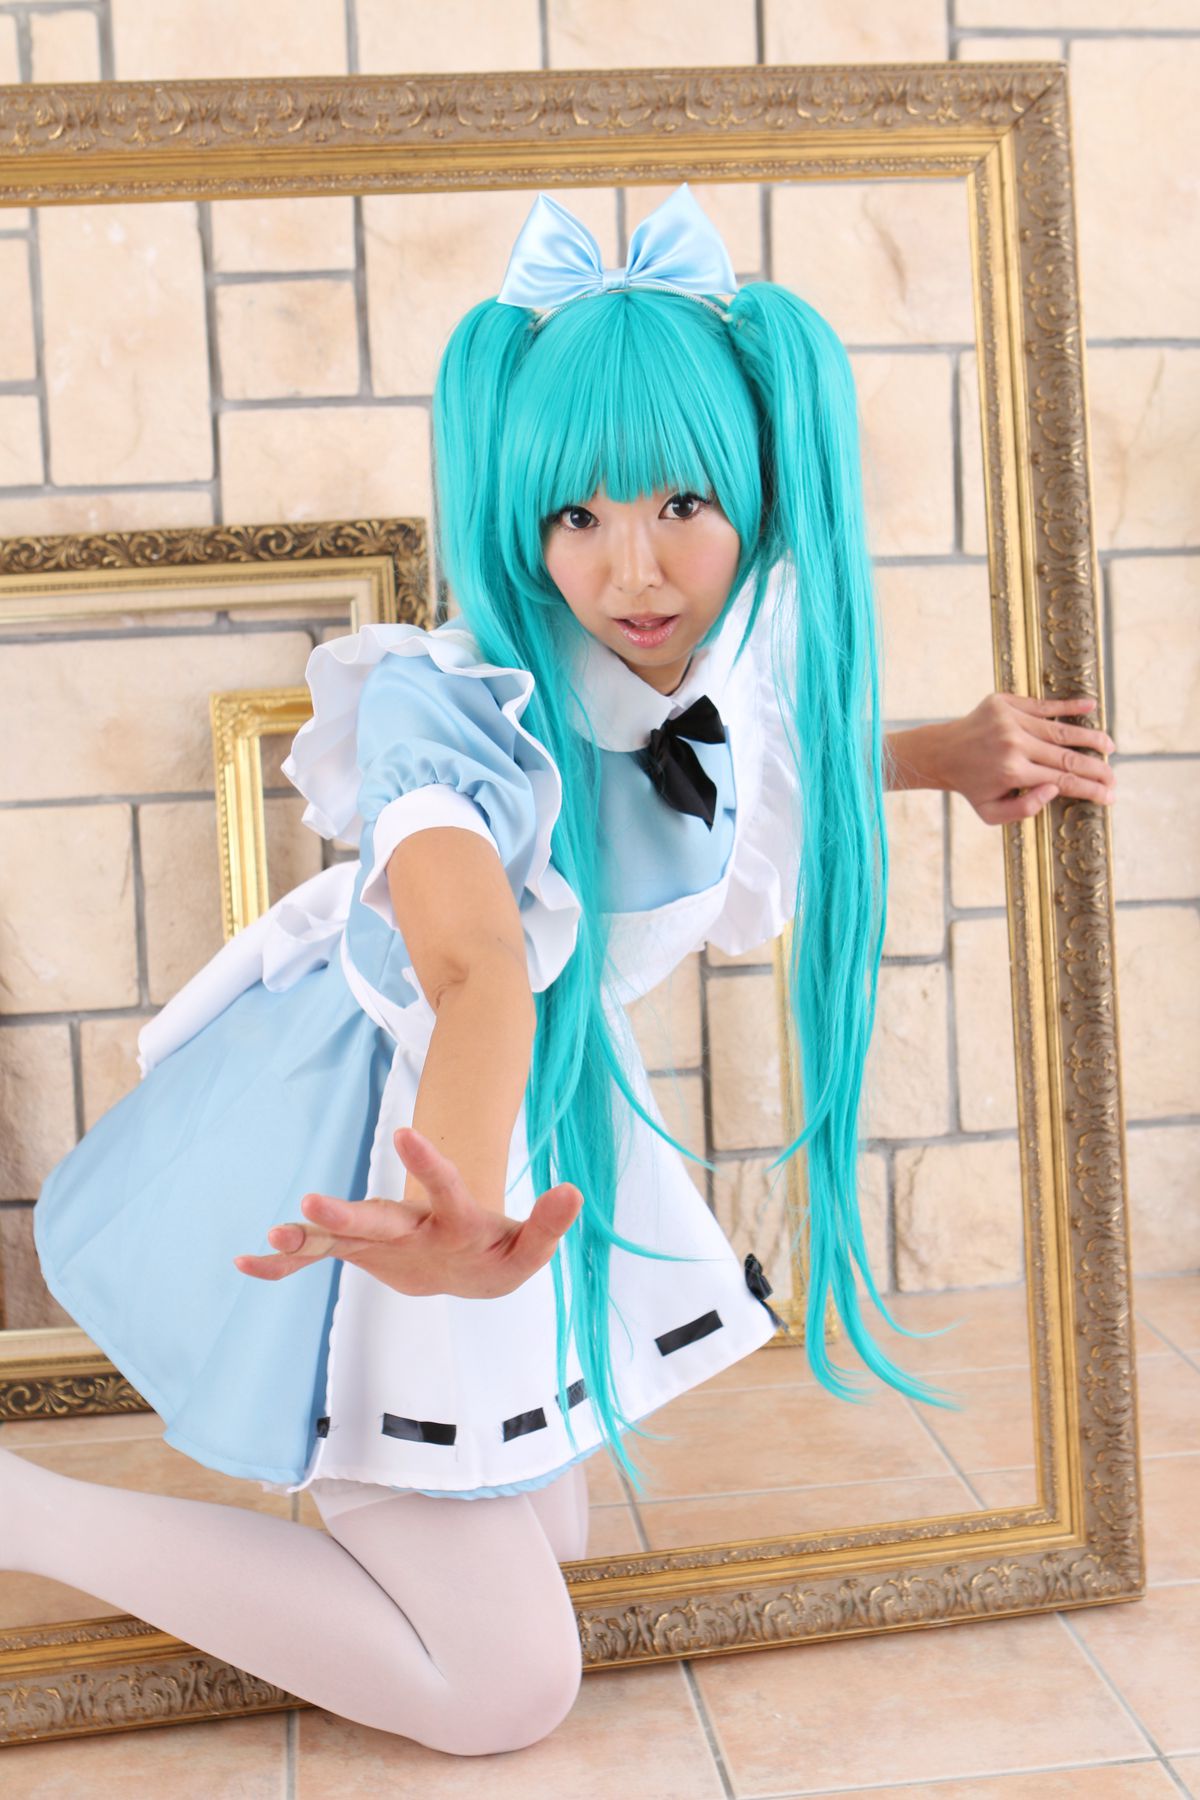 [Cosplay] New Hatsune Miku from Vocaloid - So Sexy[200P]